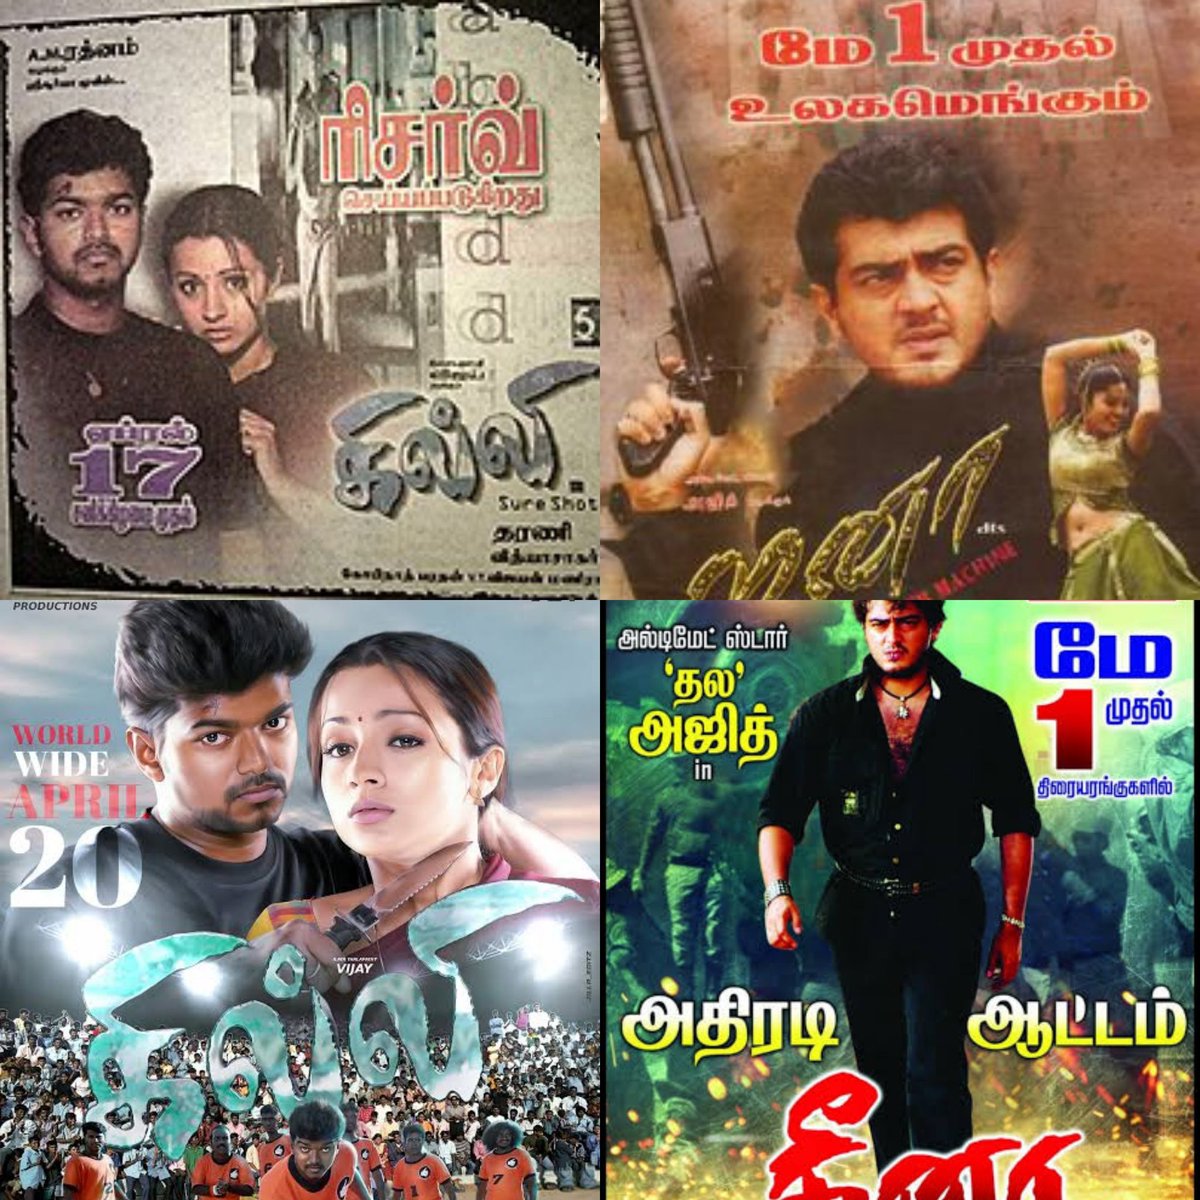 Twenty years ago, #Ghilli released on April 17 and had a monstrous run. A movie called #Jana released on May 1, but it had sound only on that particular day. People forgot about the 'one day' movie and enjoyed Ghilli ❤️ #HistoryRepeats itself again with #GhilliReRelease 💥